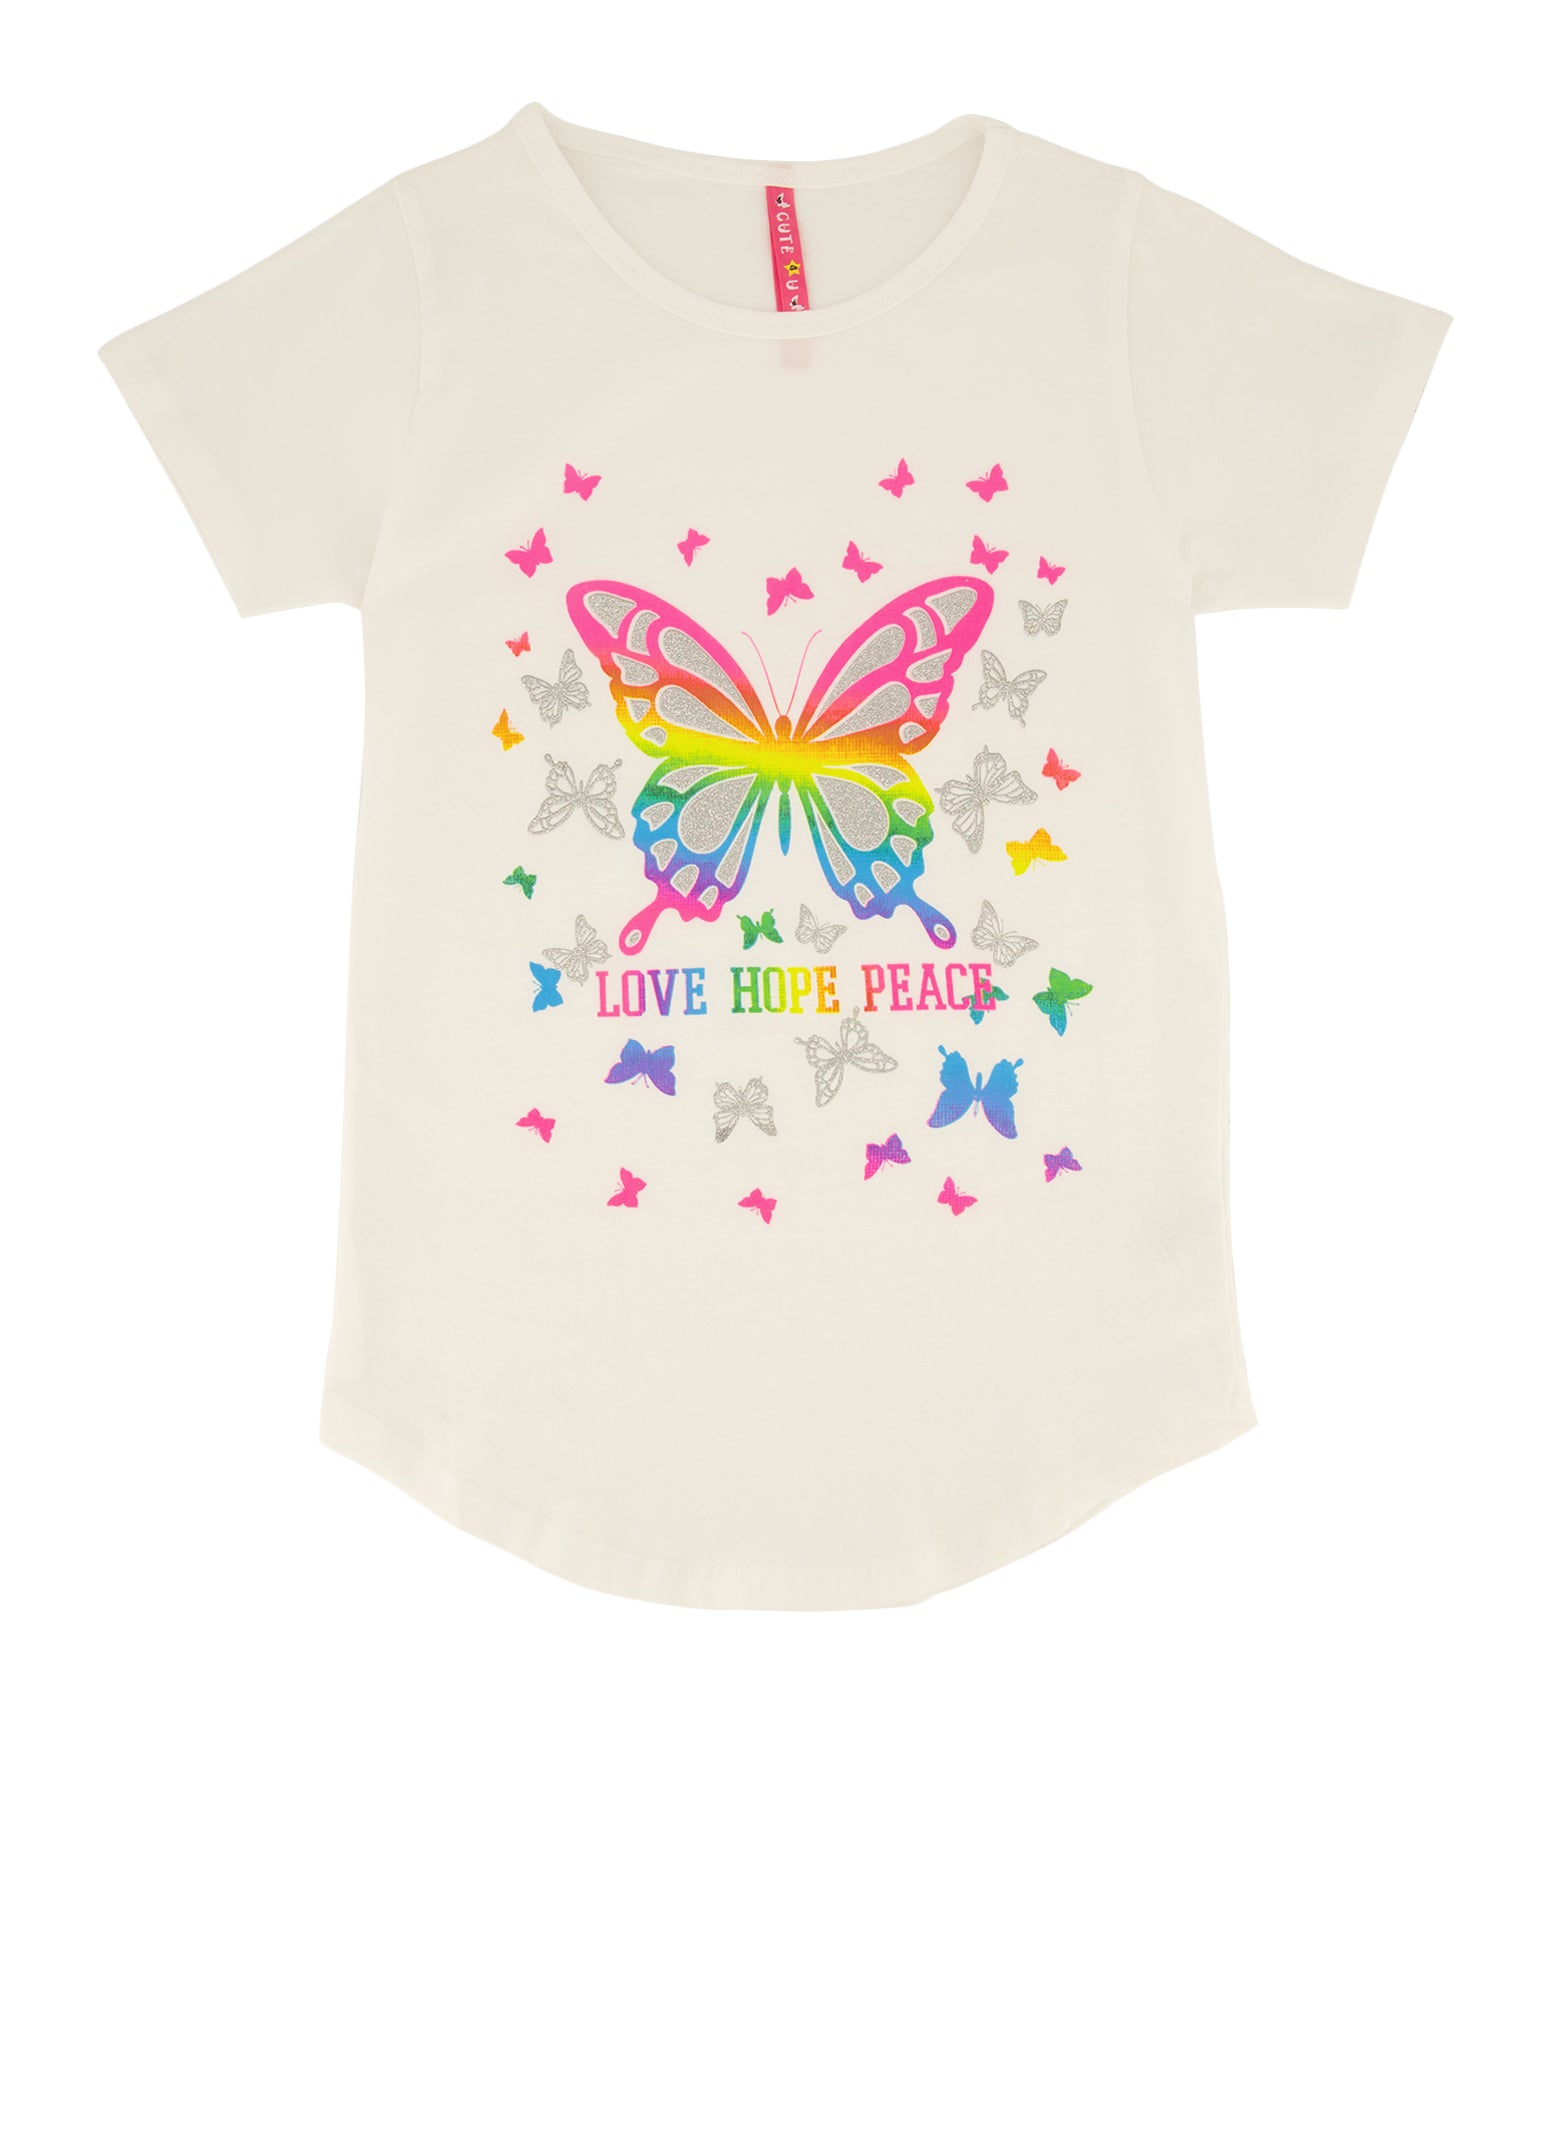 Girls Love Hope Peace Butterfly Glitter Graphic Tee, White, Size 7-8